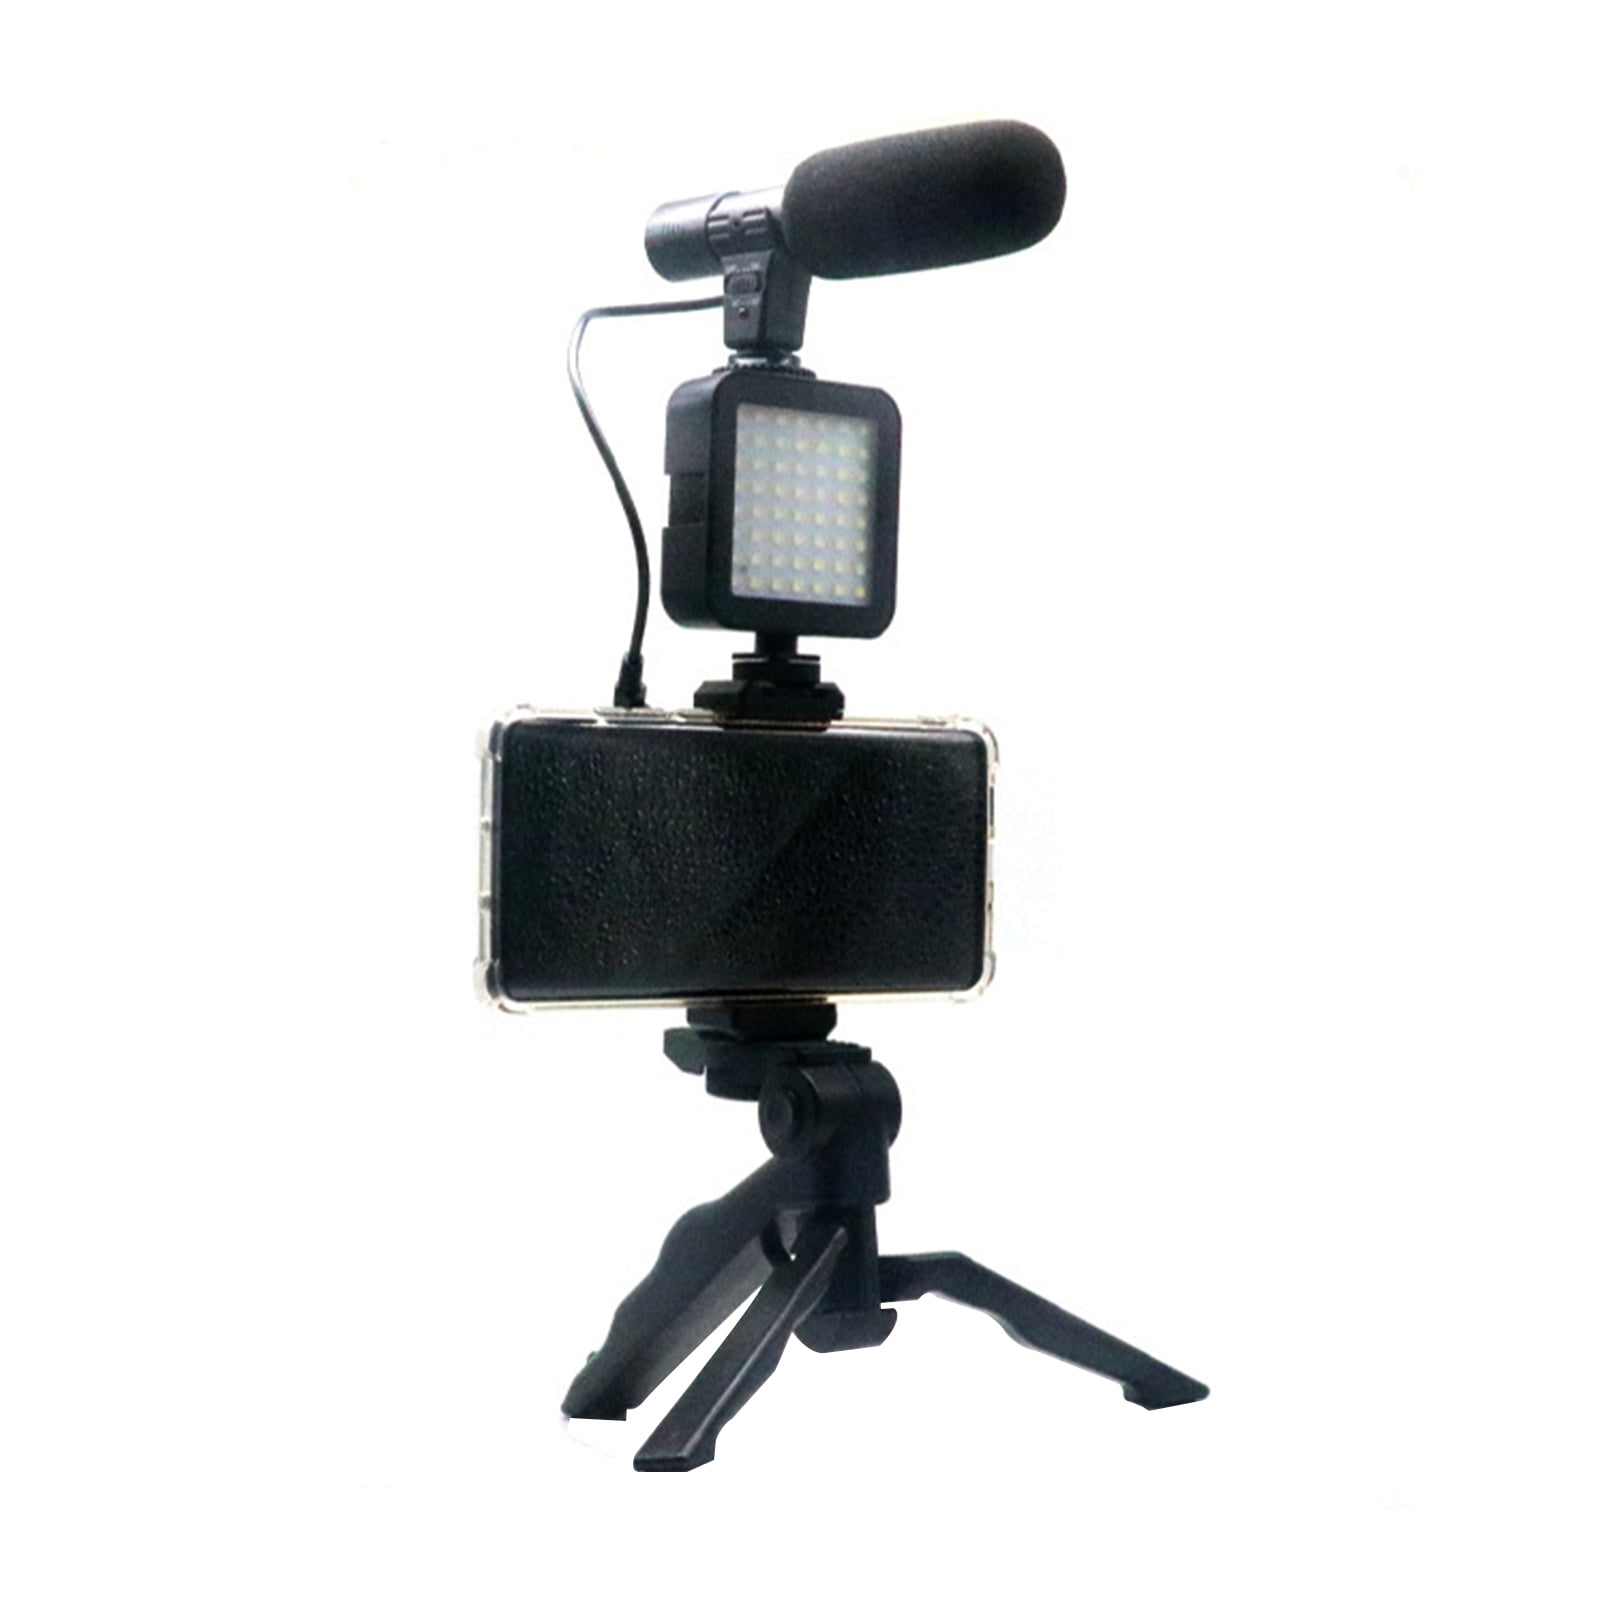 01 Fill Light Set Lightweight Fill Lamp Set Video Conference Lighting Universal Portable Video Microphone Kit for Live Broadcast for Studio for Office for Home 